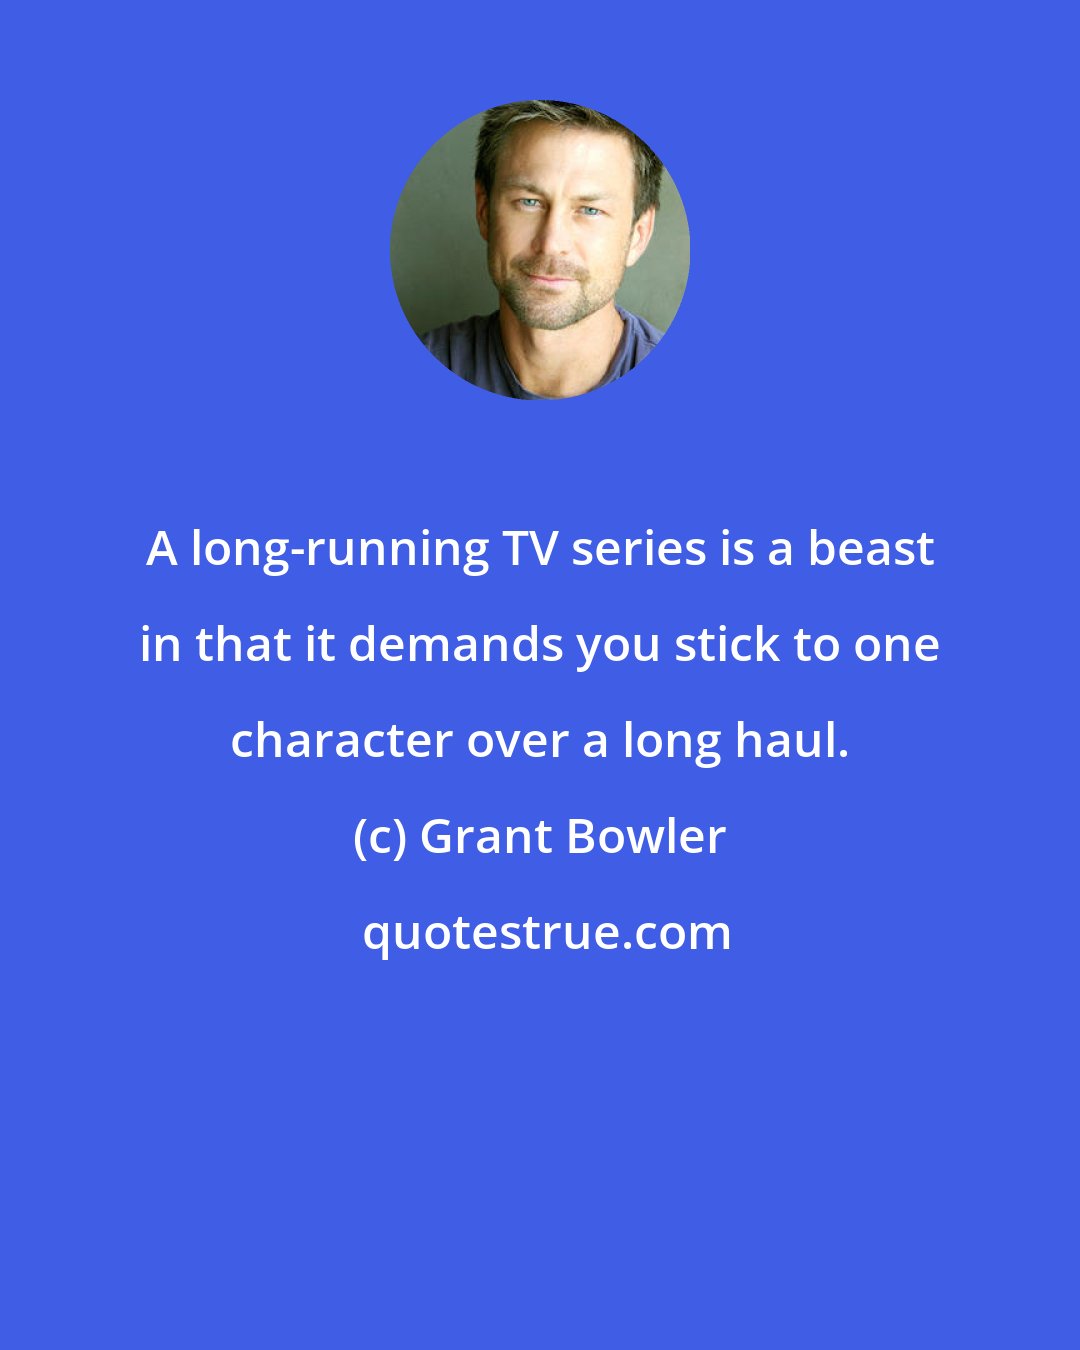 Grant Bowler: A long-running TV series is a beast in that it demands you stick to one character over a long haul.